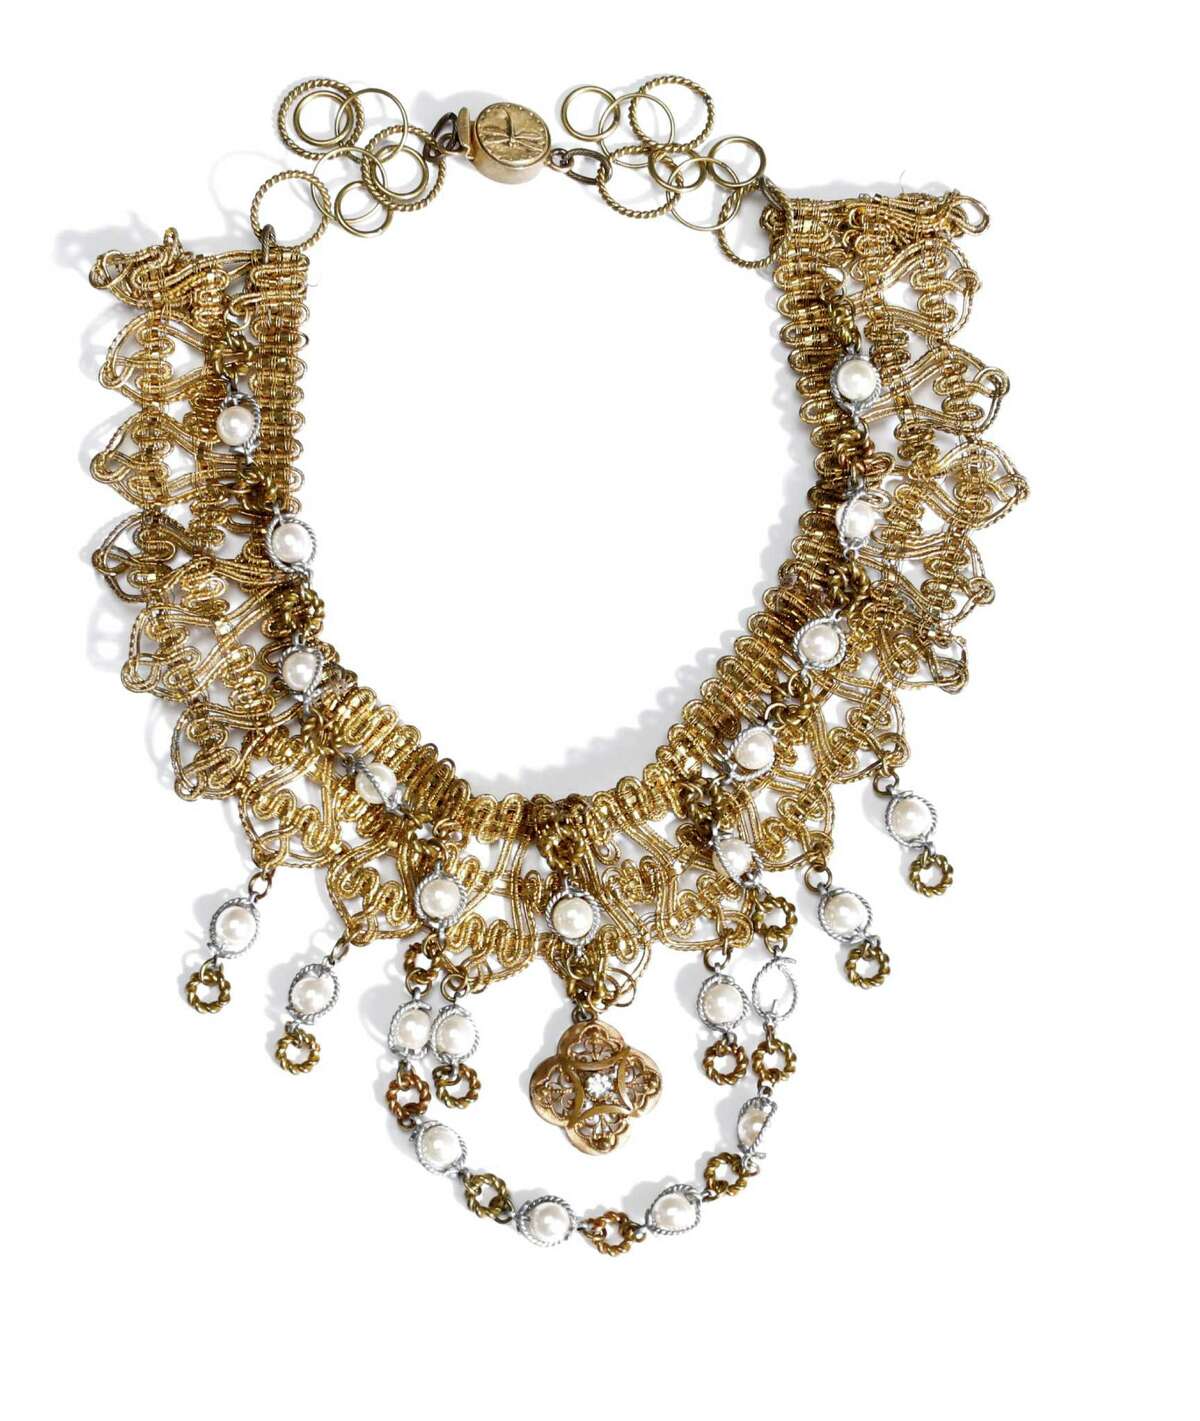 Wish List: Bedazzle at the ball in antique lace neckwear